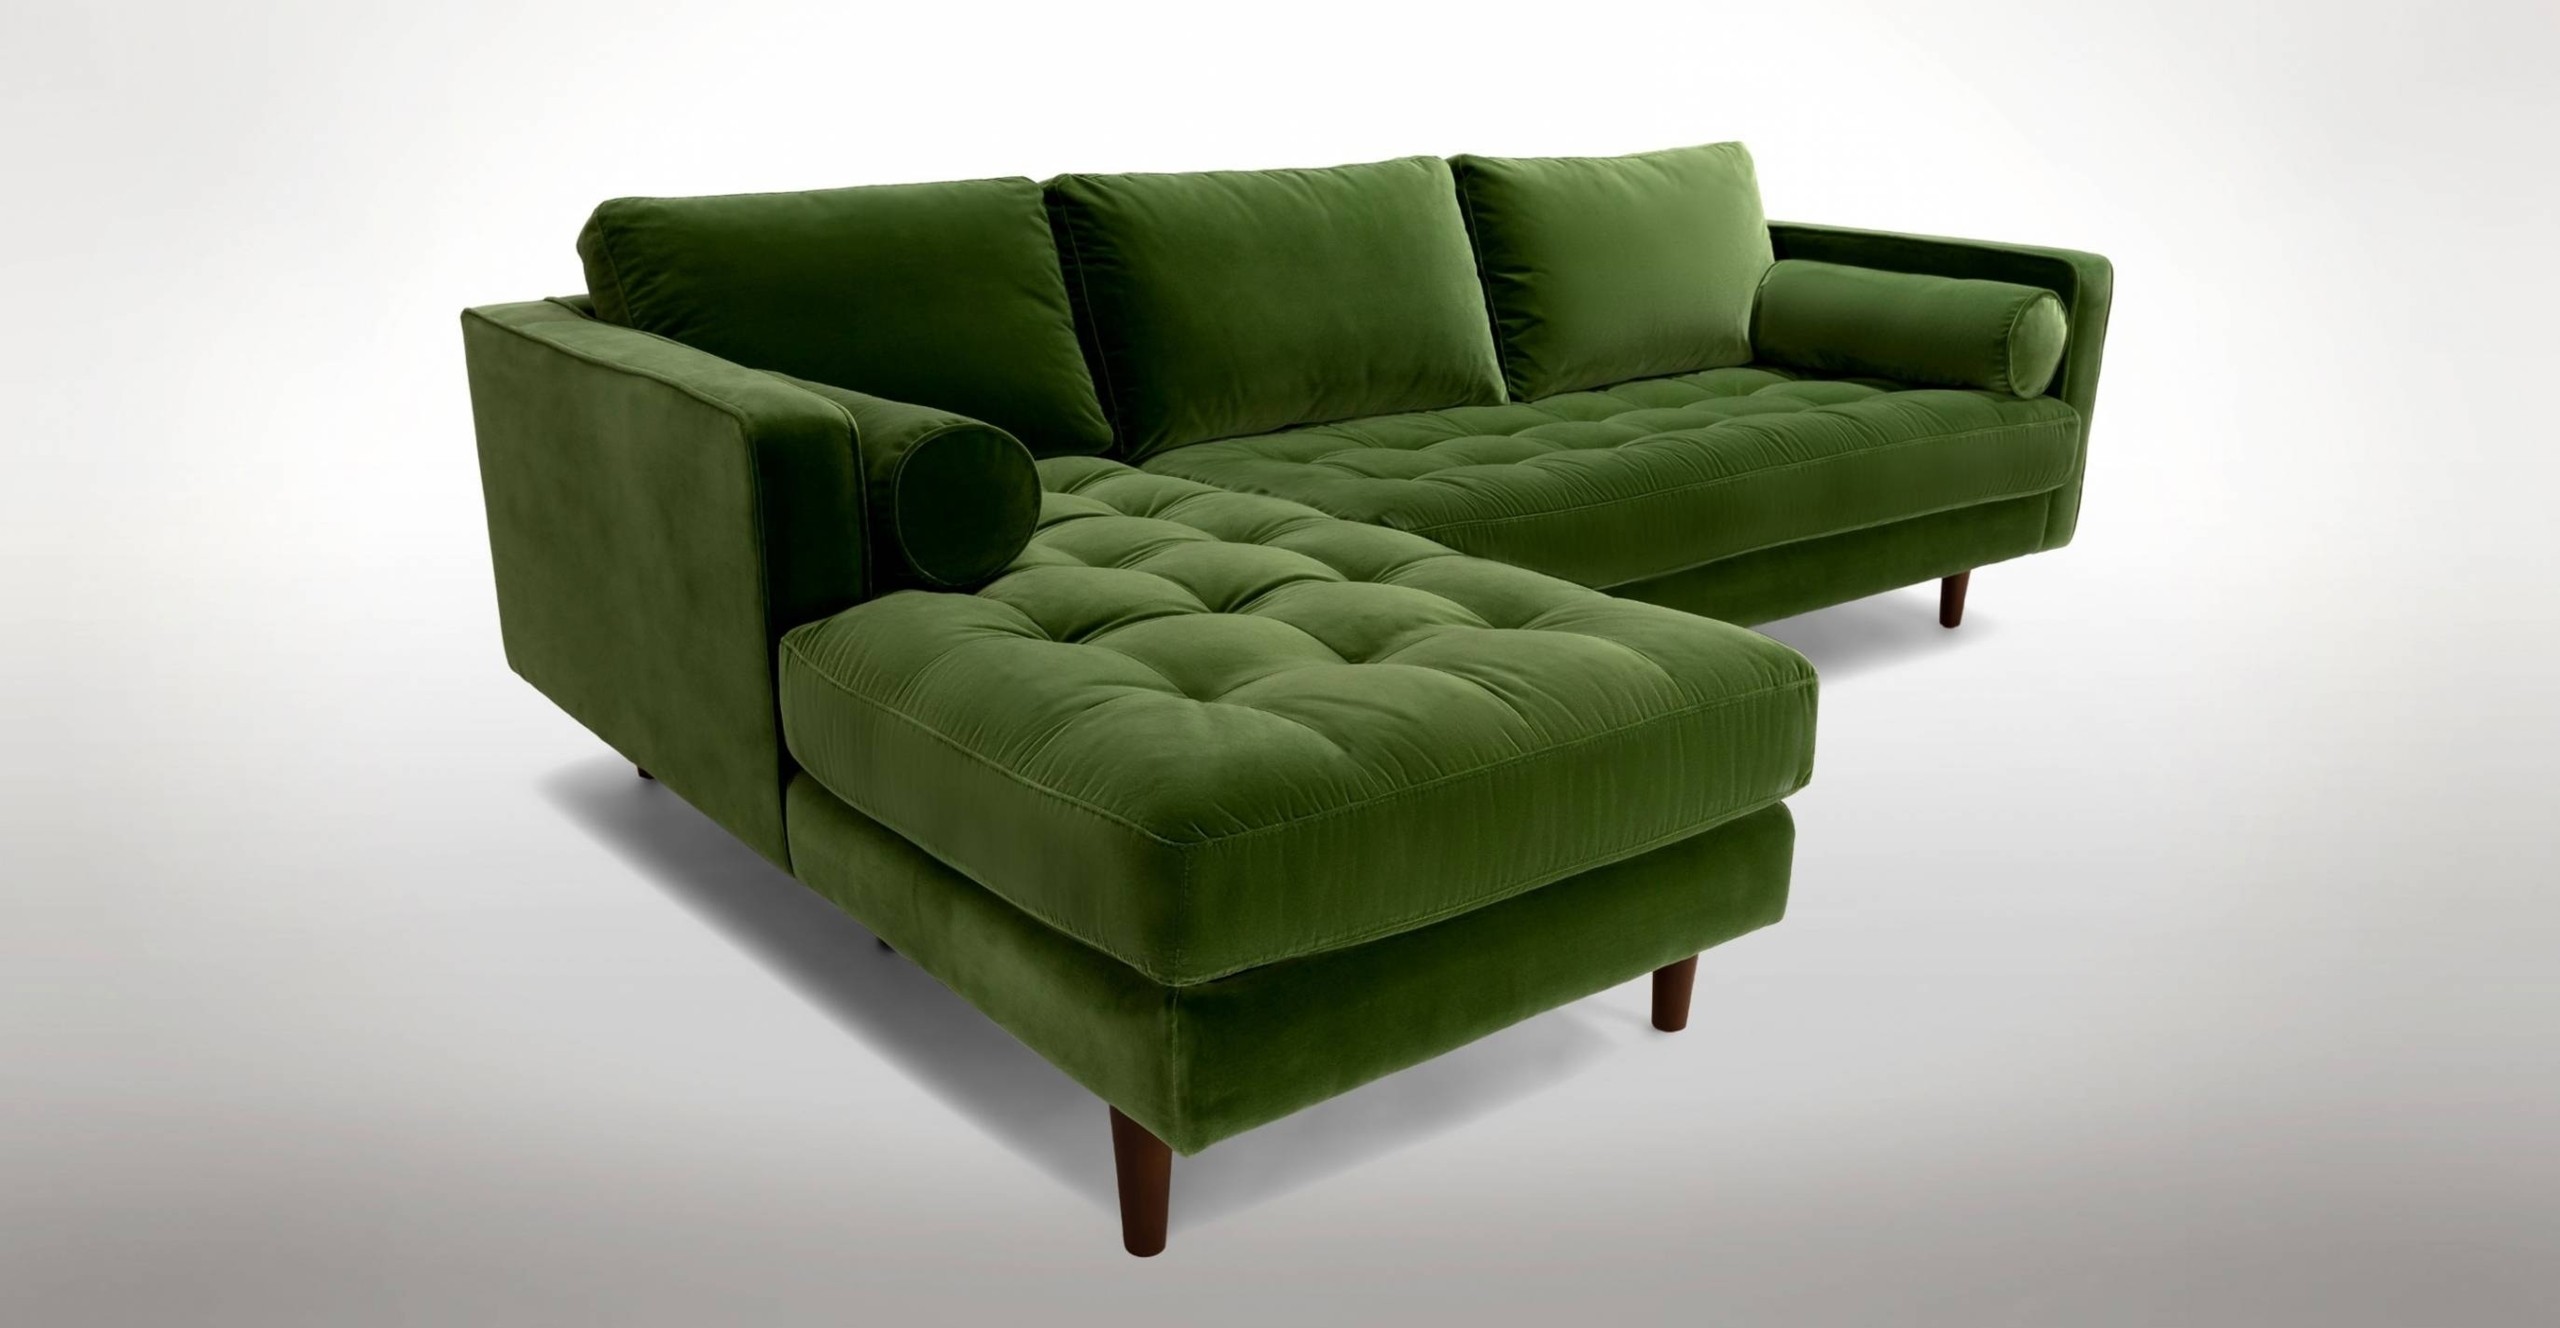 30 best collection of green sectional sofa with chaise